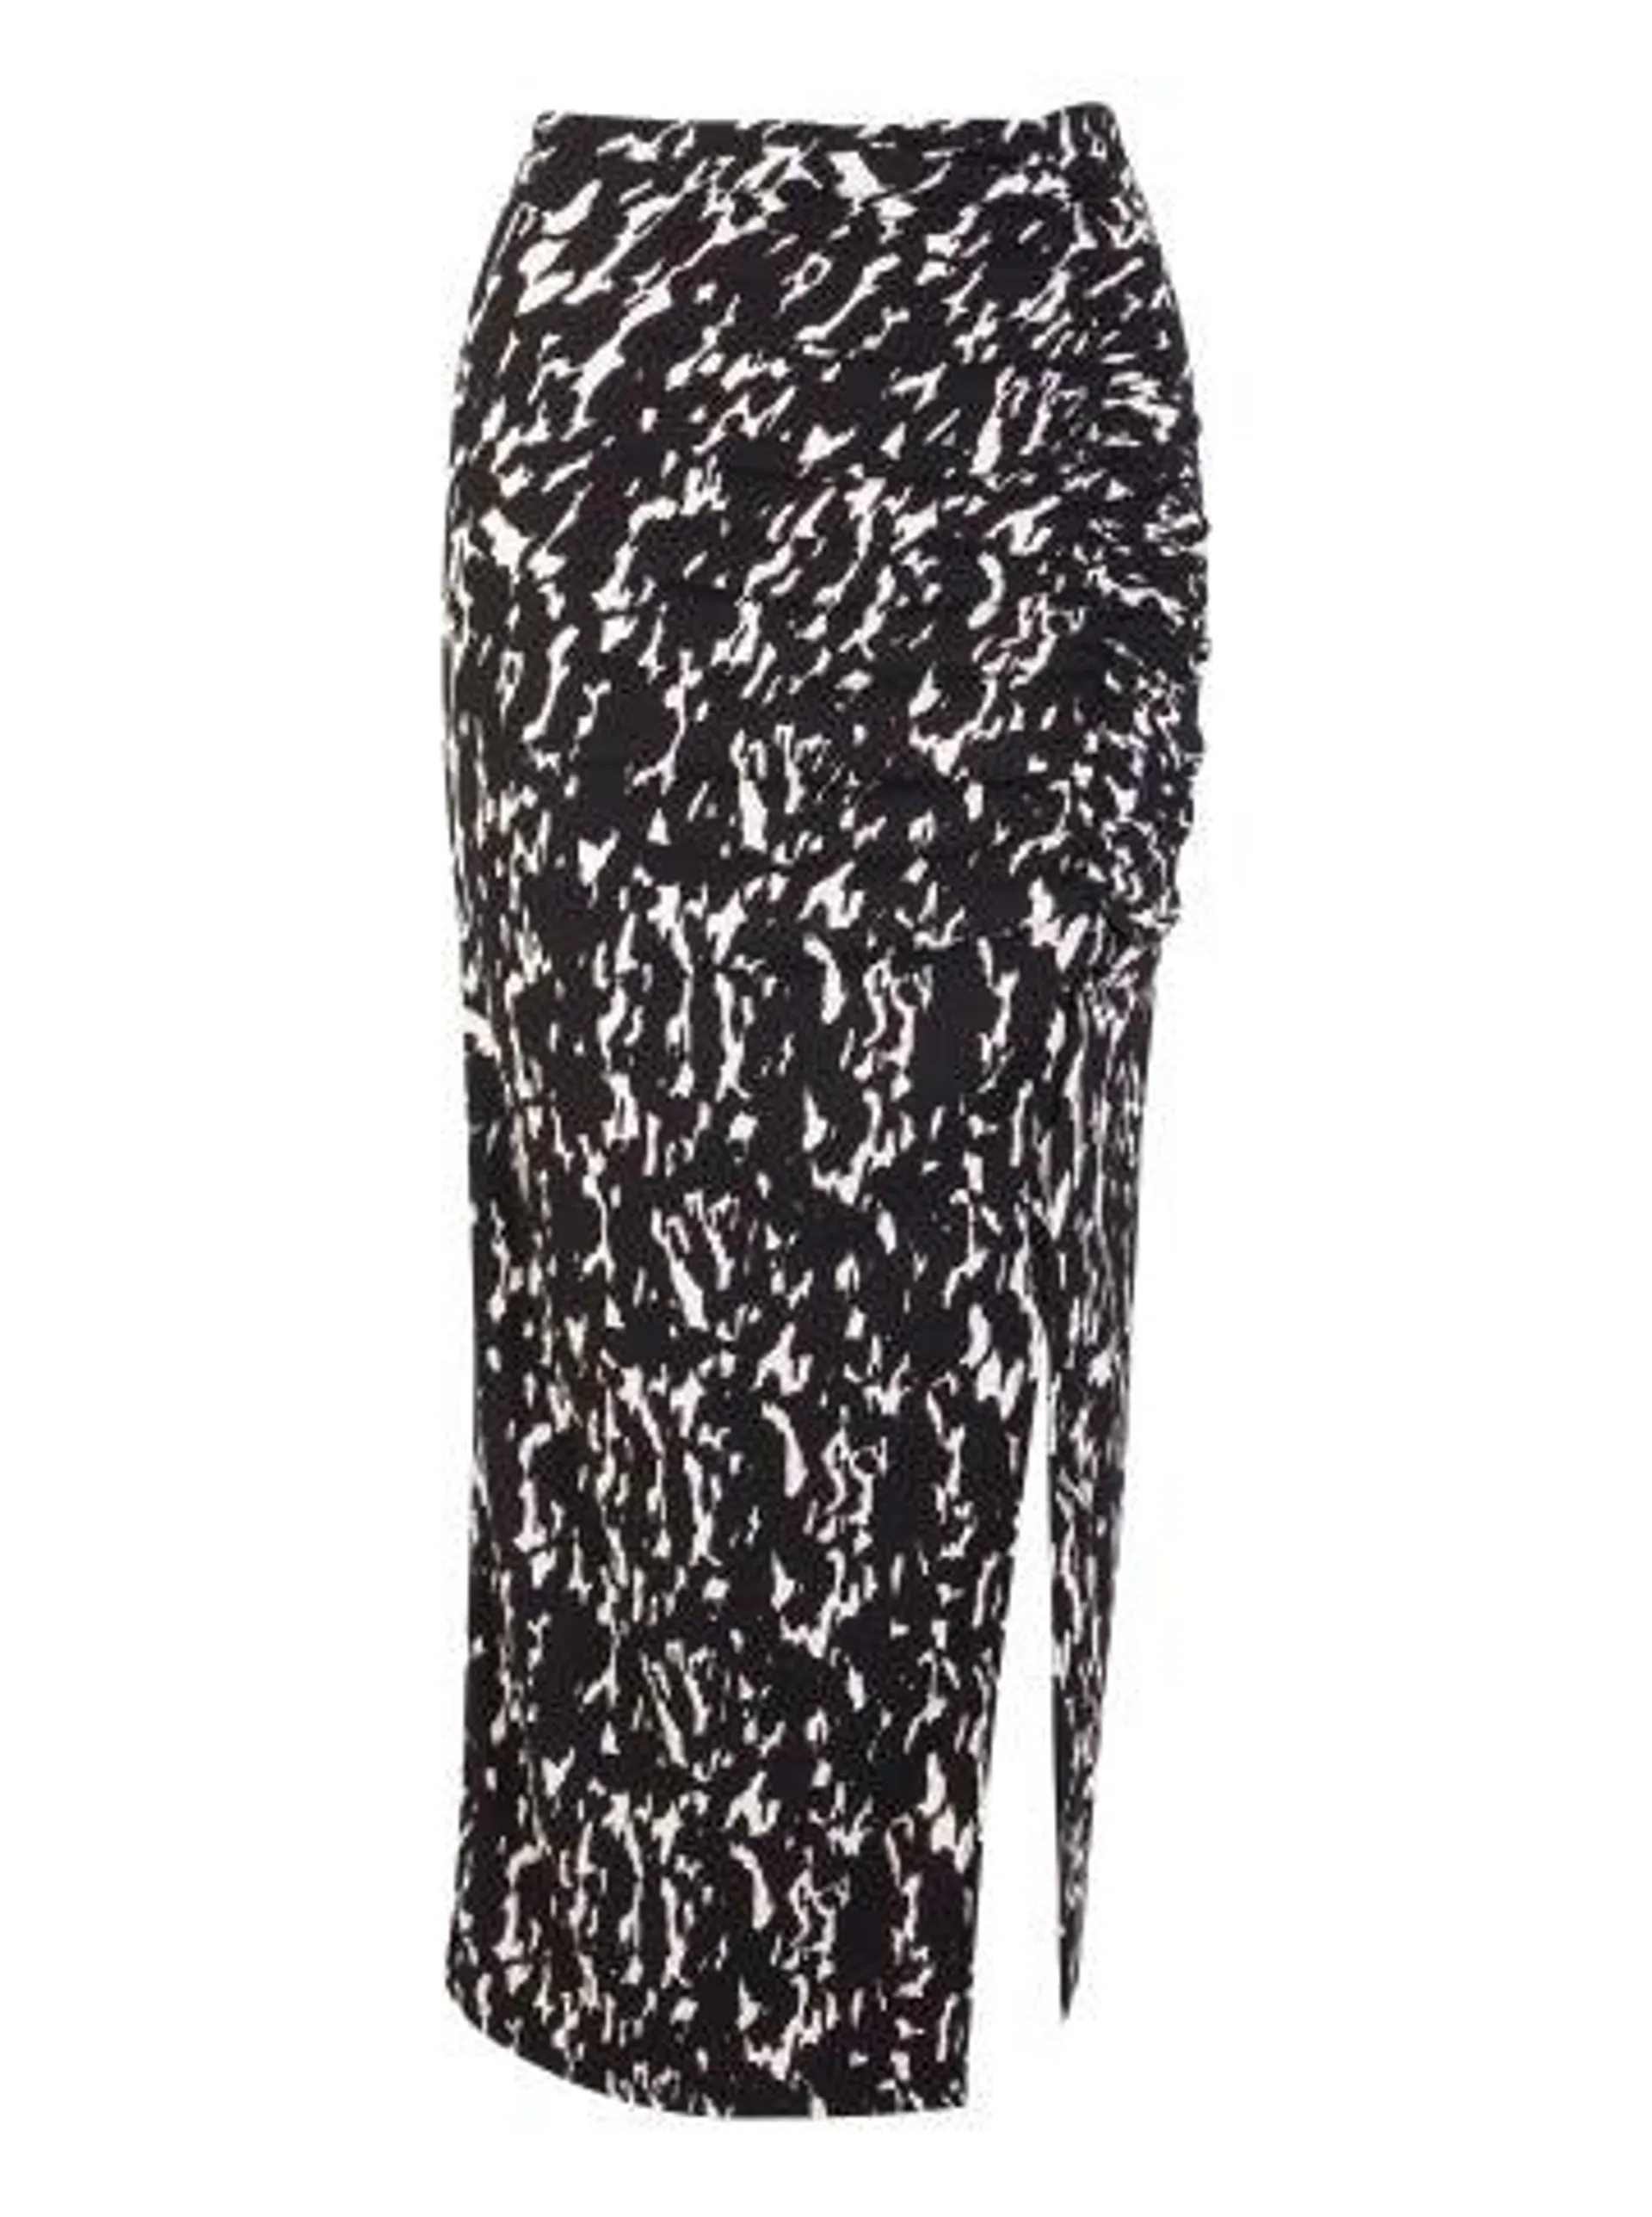 Women's Crepe Gathered Midi Skirt in Black Hatched